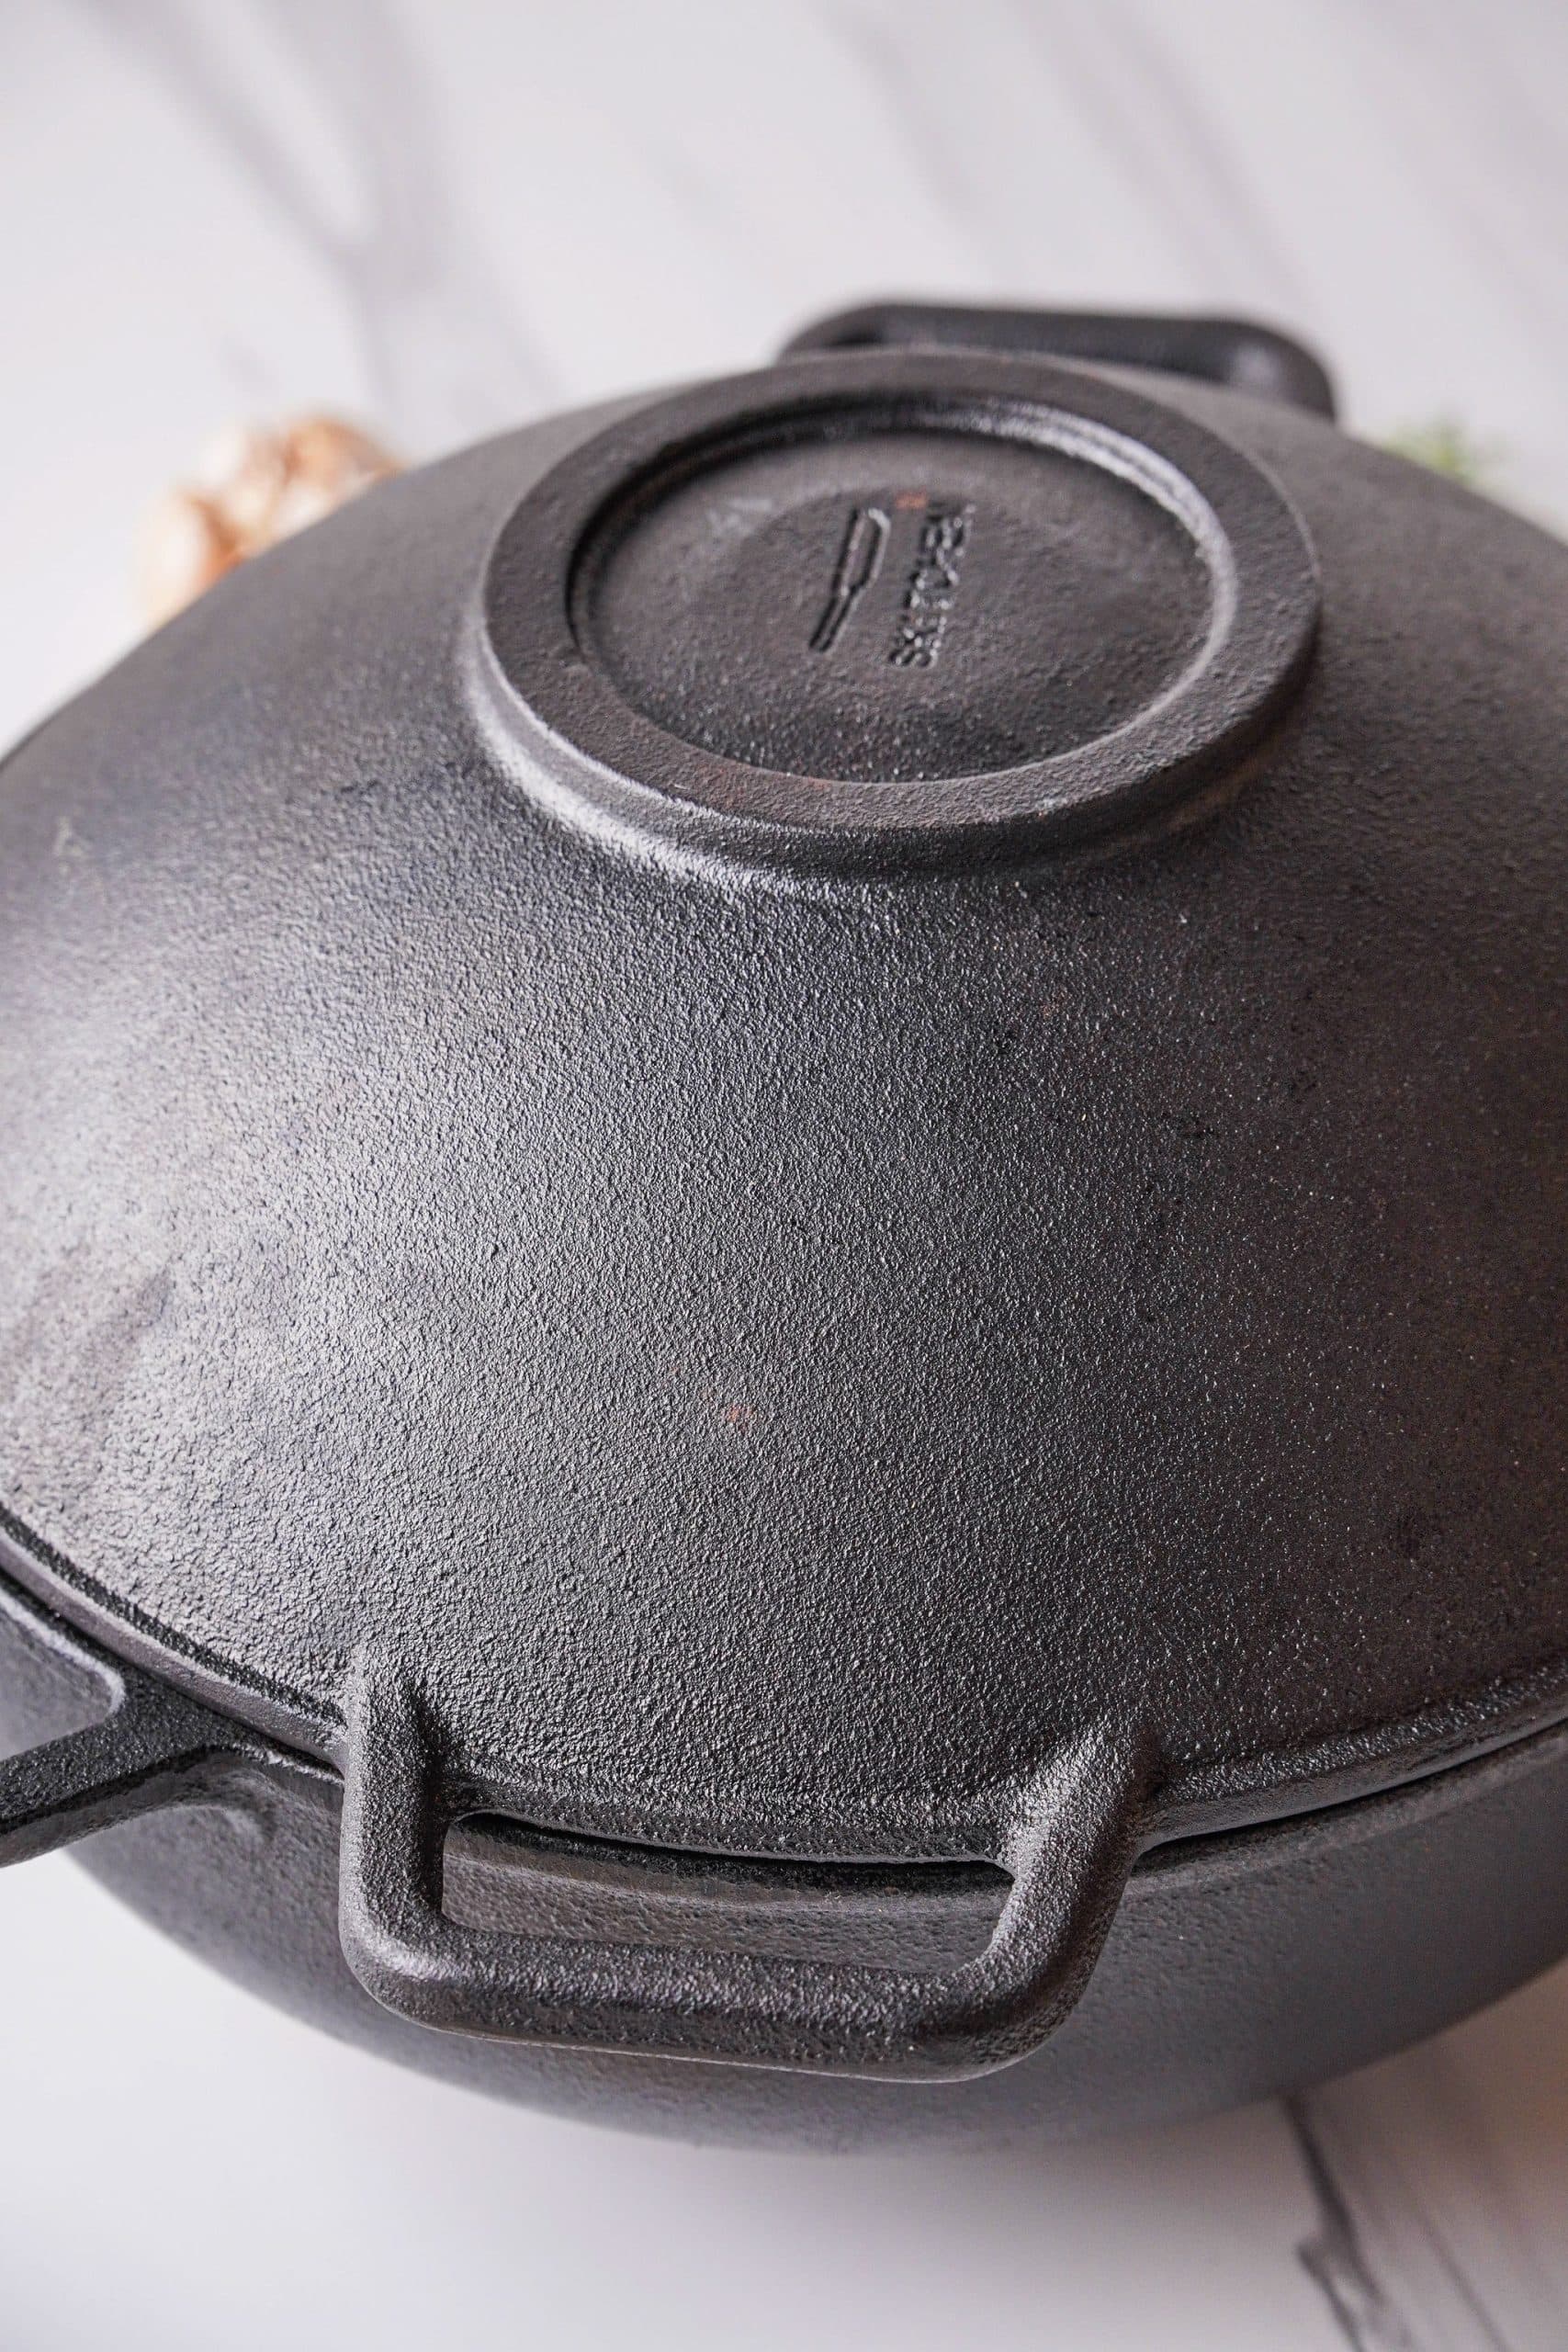 covering skillet with lid